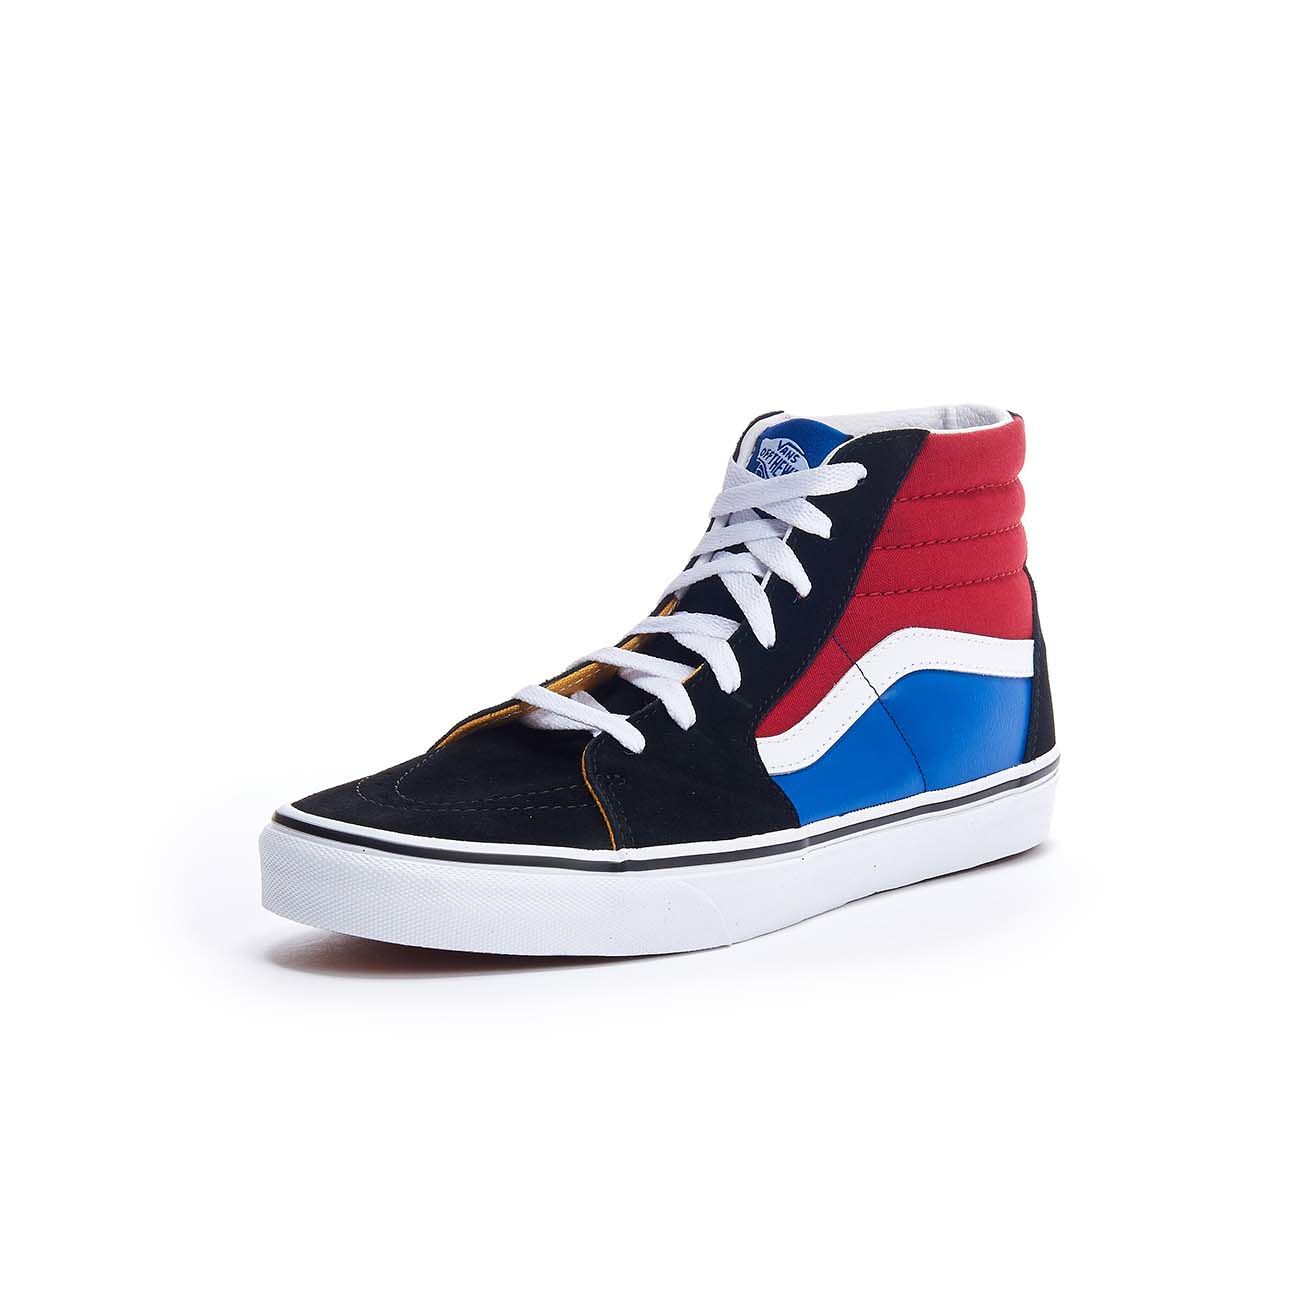 VANS SK8-HI HIGH SNEAKER IN FABRIC AND ECO-LEATHER Kid Black Chilli Pepper  | Mascheroni Store